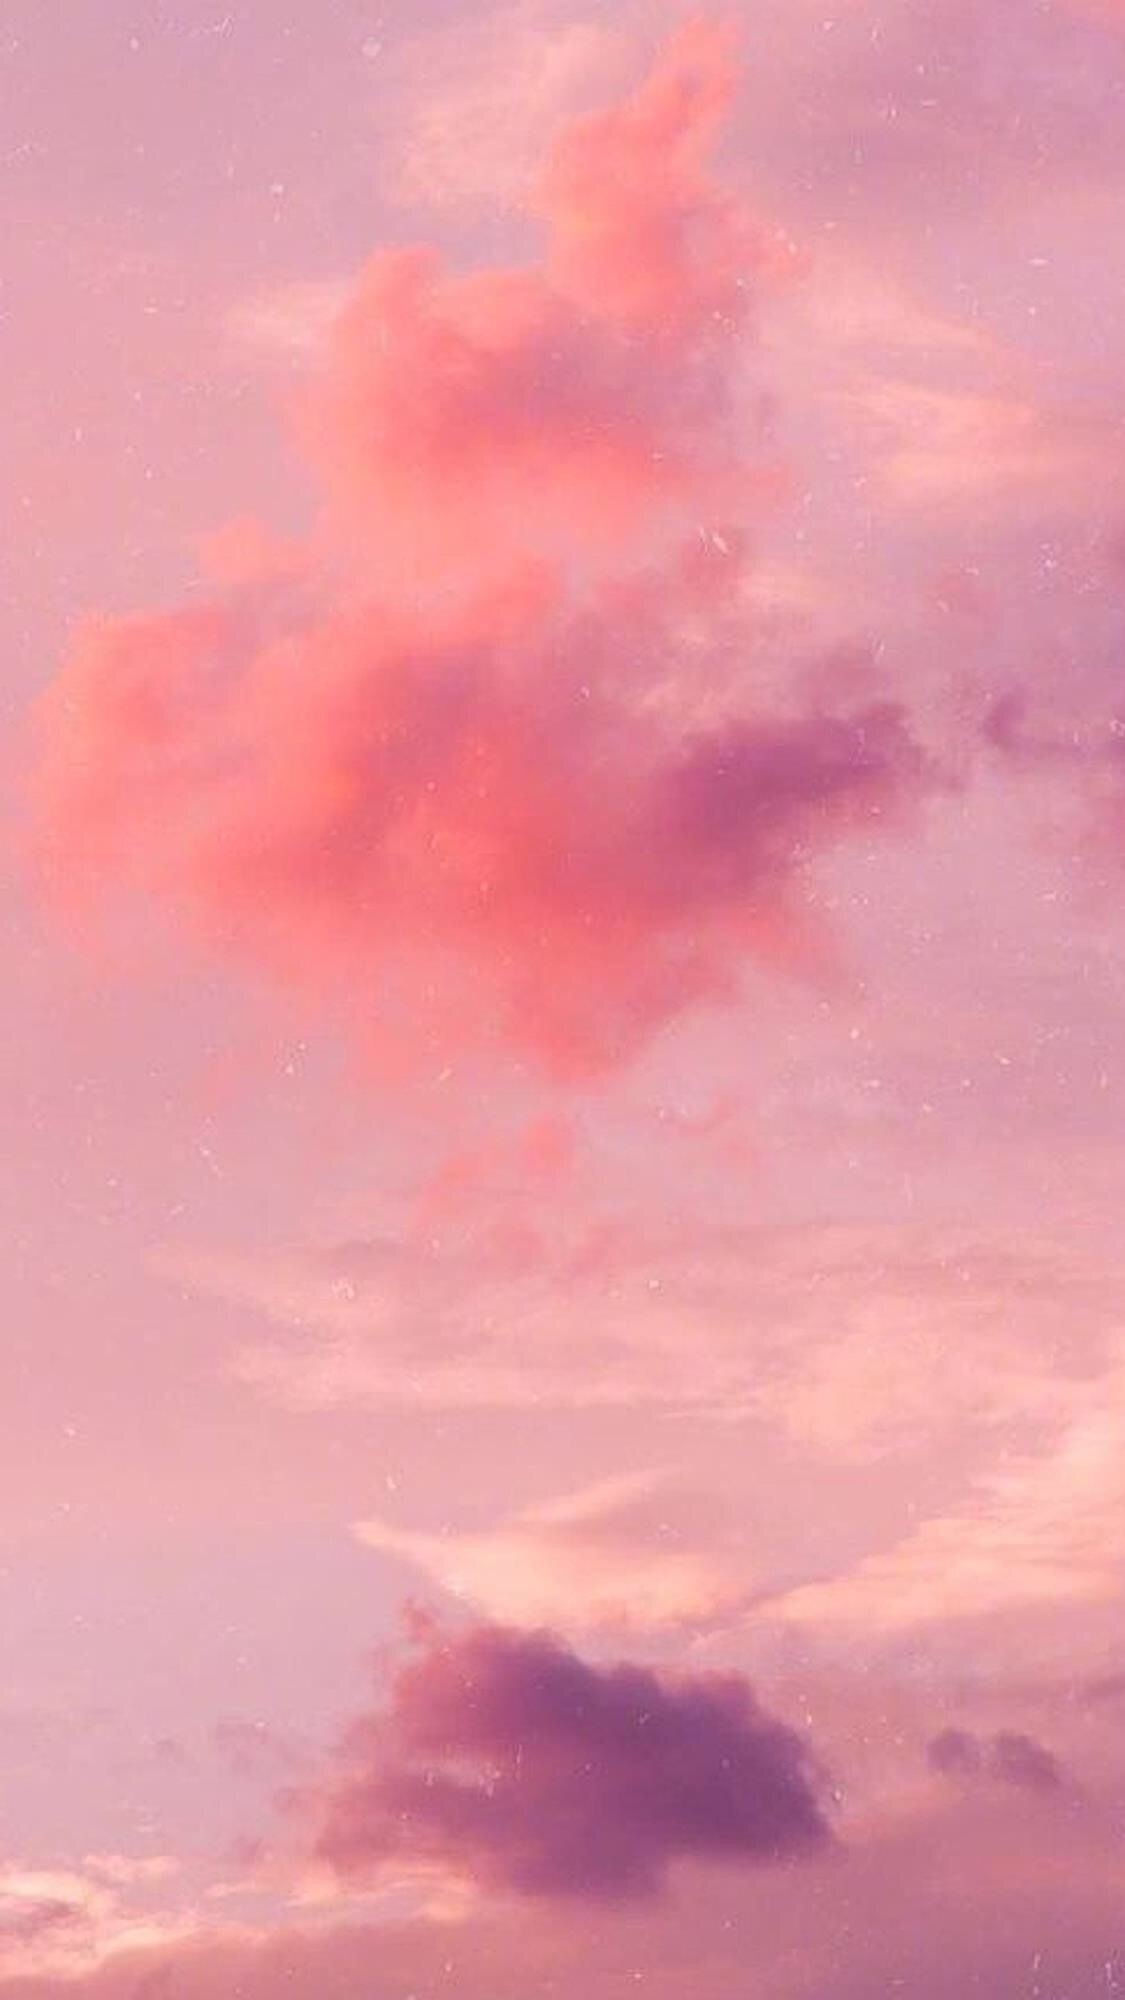 Color Clouds iPhone Wallpaper Free Color Clouds iPhone Background